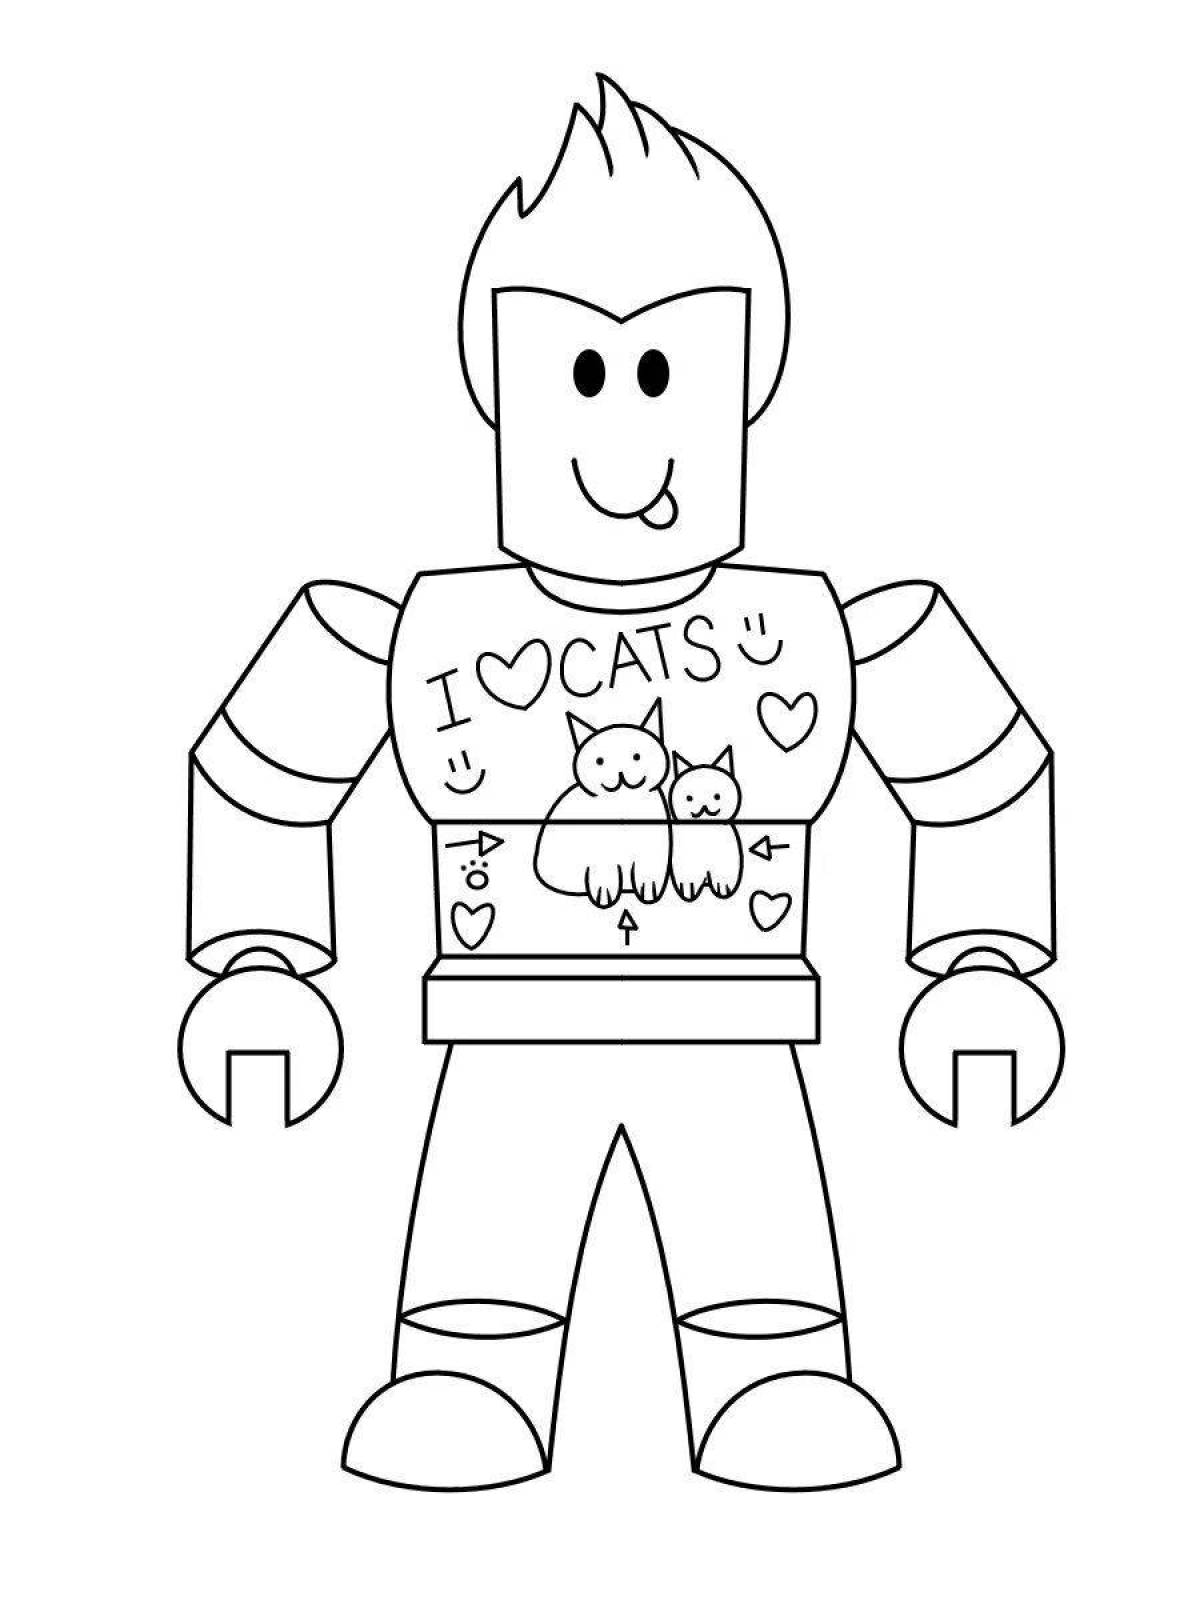 Roblox character coloring page with color splatter